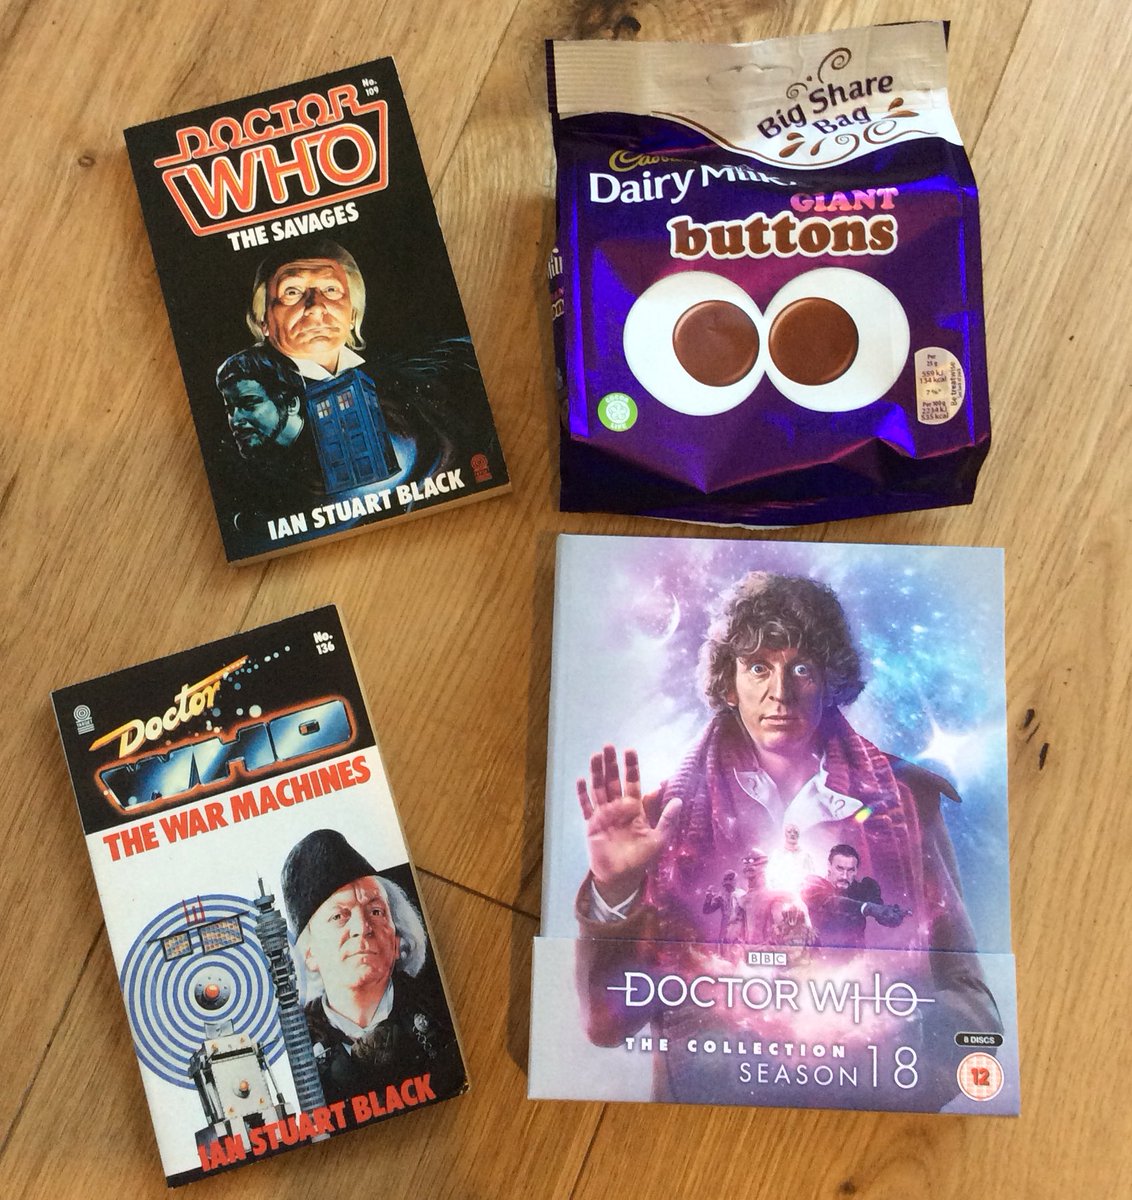 Weekend goals #DoctorWho & #chocolatebuttons - who could  ask for anything more? 🤷🏻‍♂️